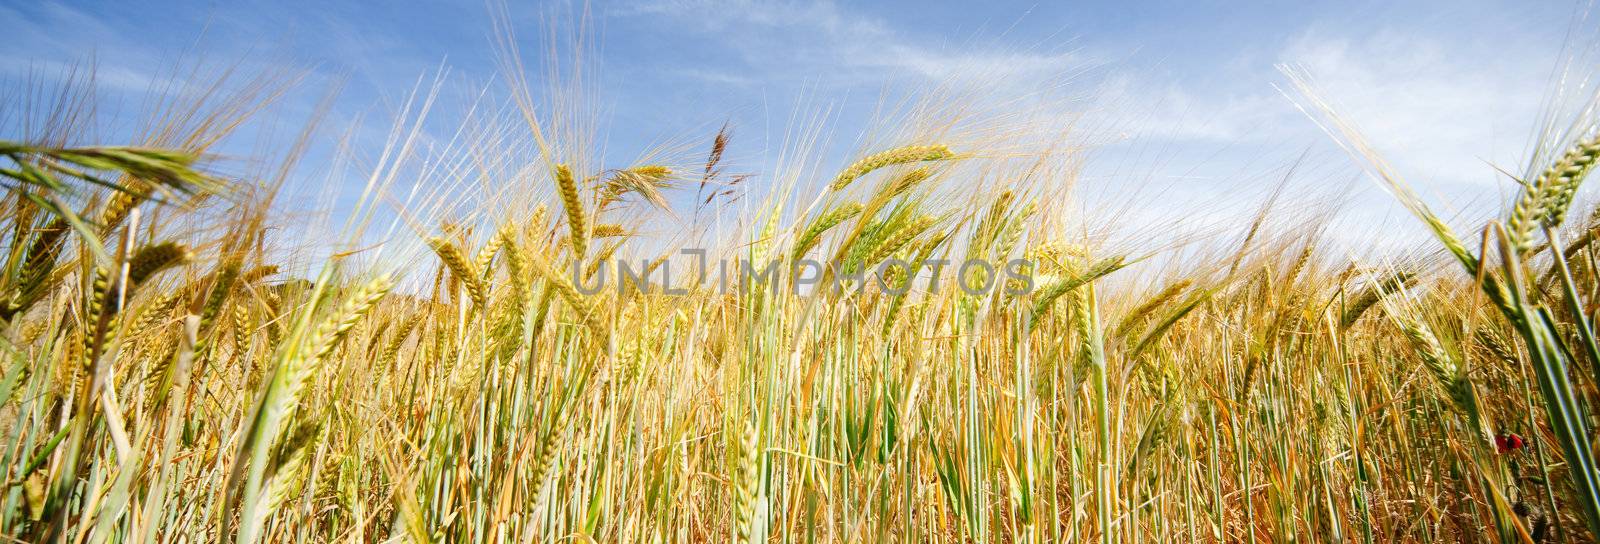 Frontal image of wheat field